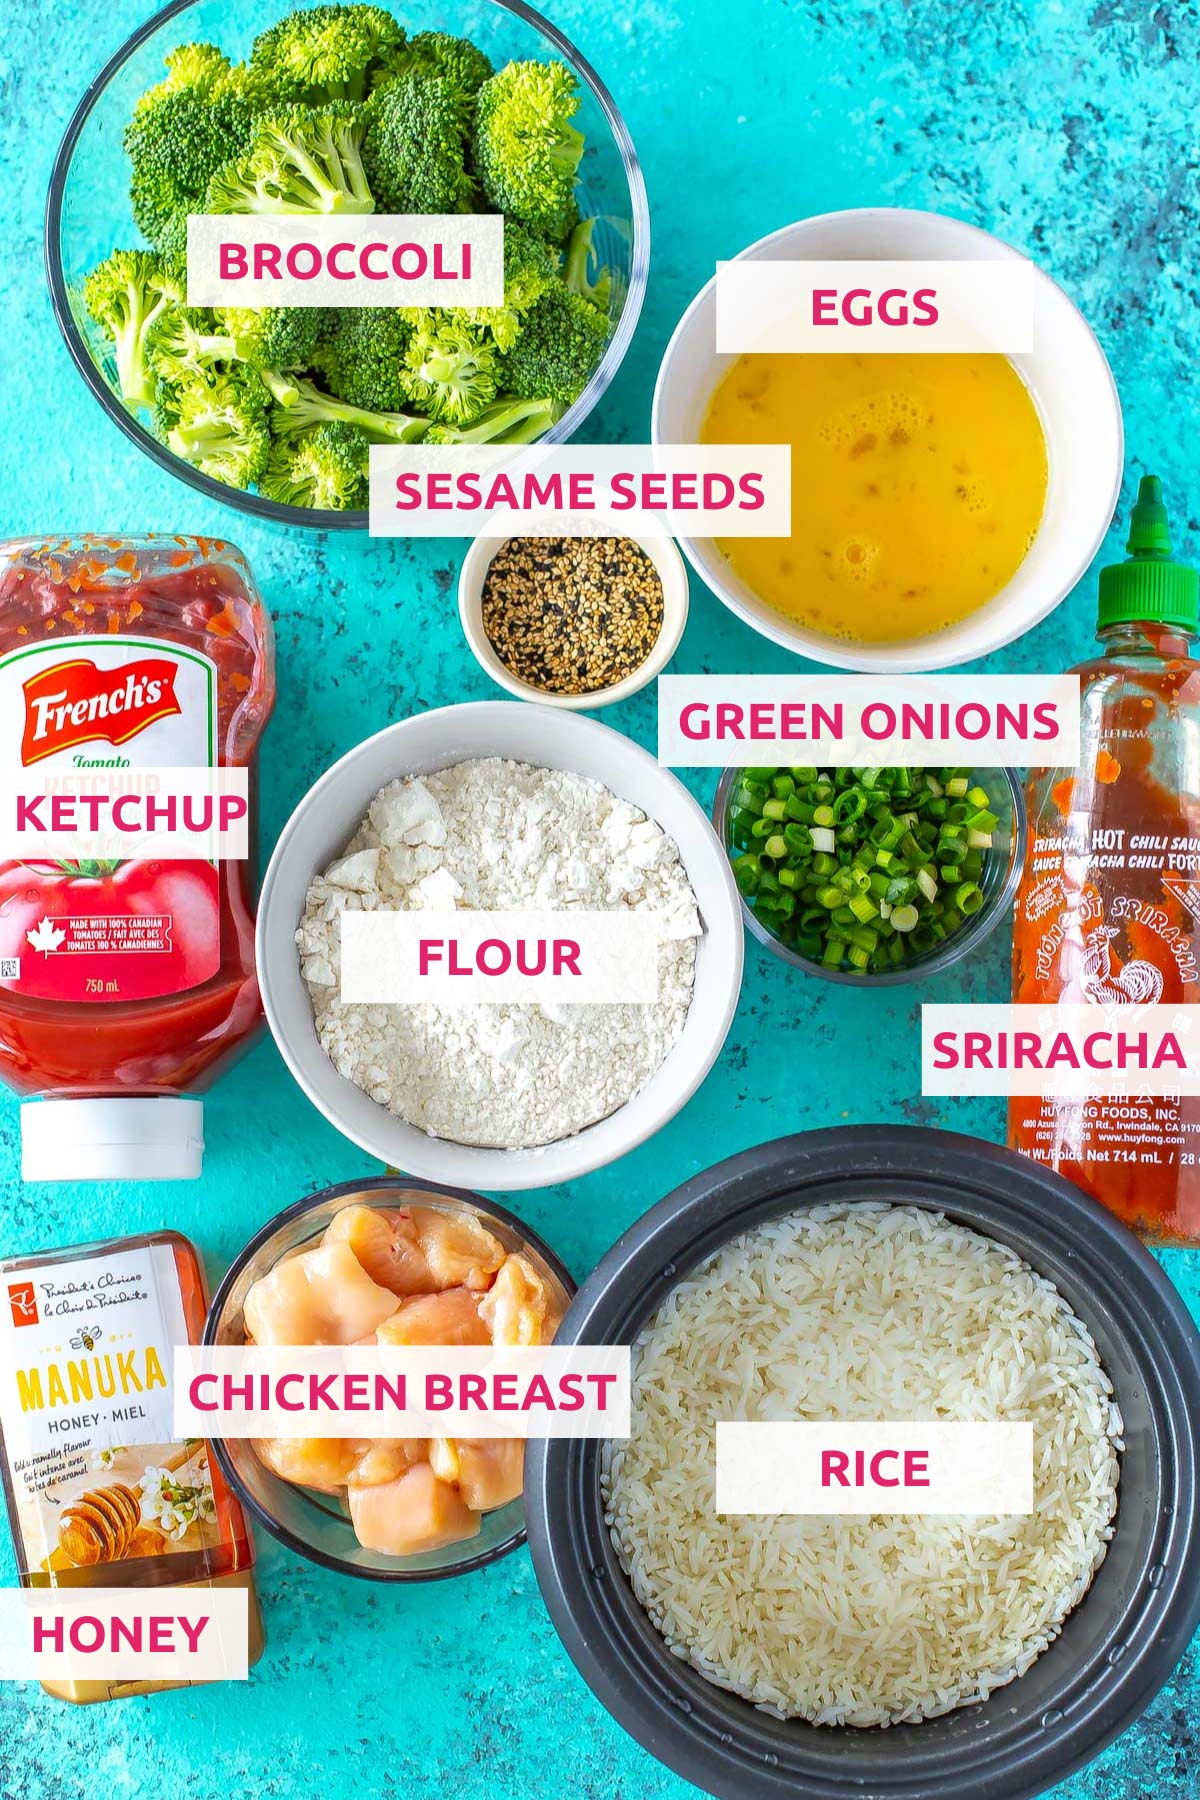 Ingredients for honey sriracha chicken meal prep bowls: chicken breast, rice, sriracha, flour, eggs, green onions, sesame seeds, broccoli, ketchup and honey.